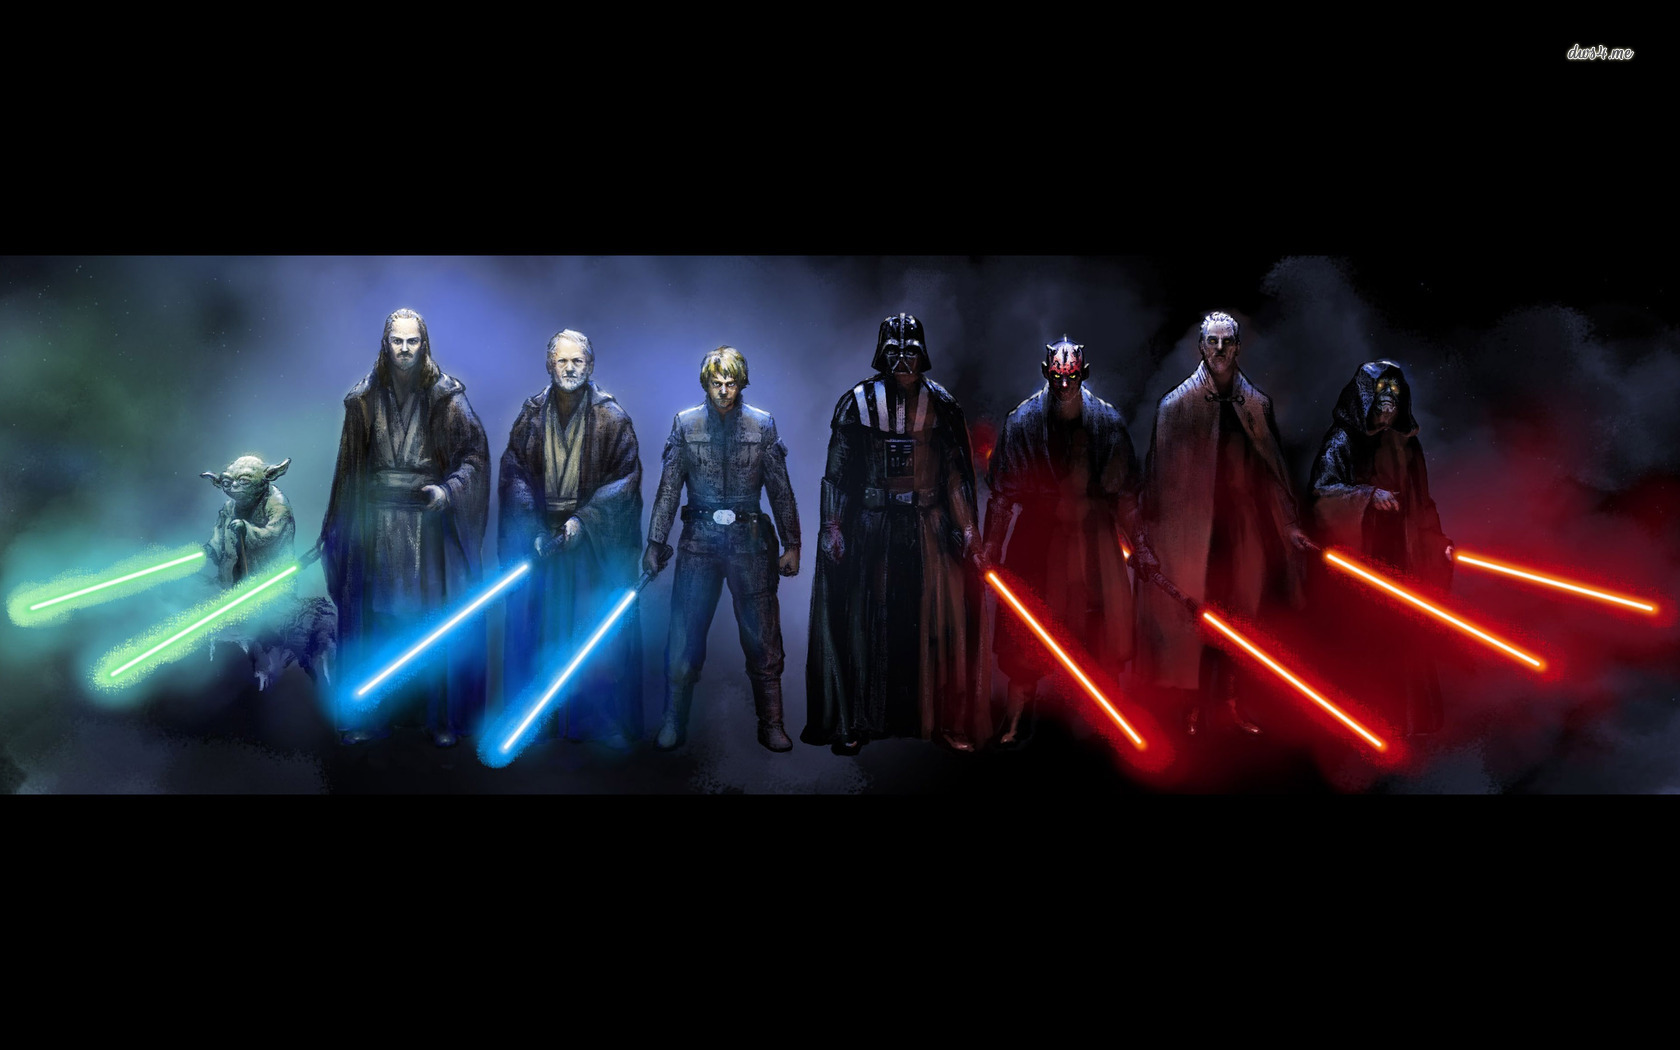 Jedi and Sith   Star Wars wallpaper   Movie wallpapers   17310